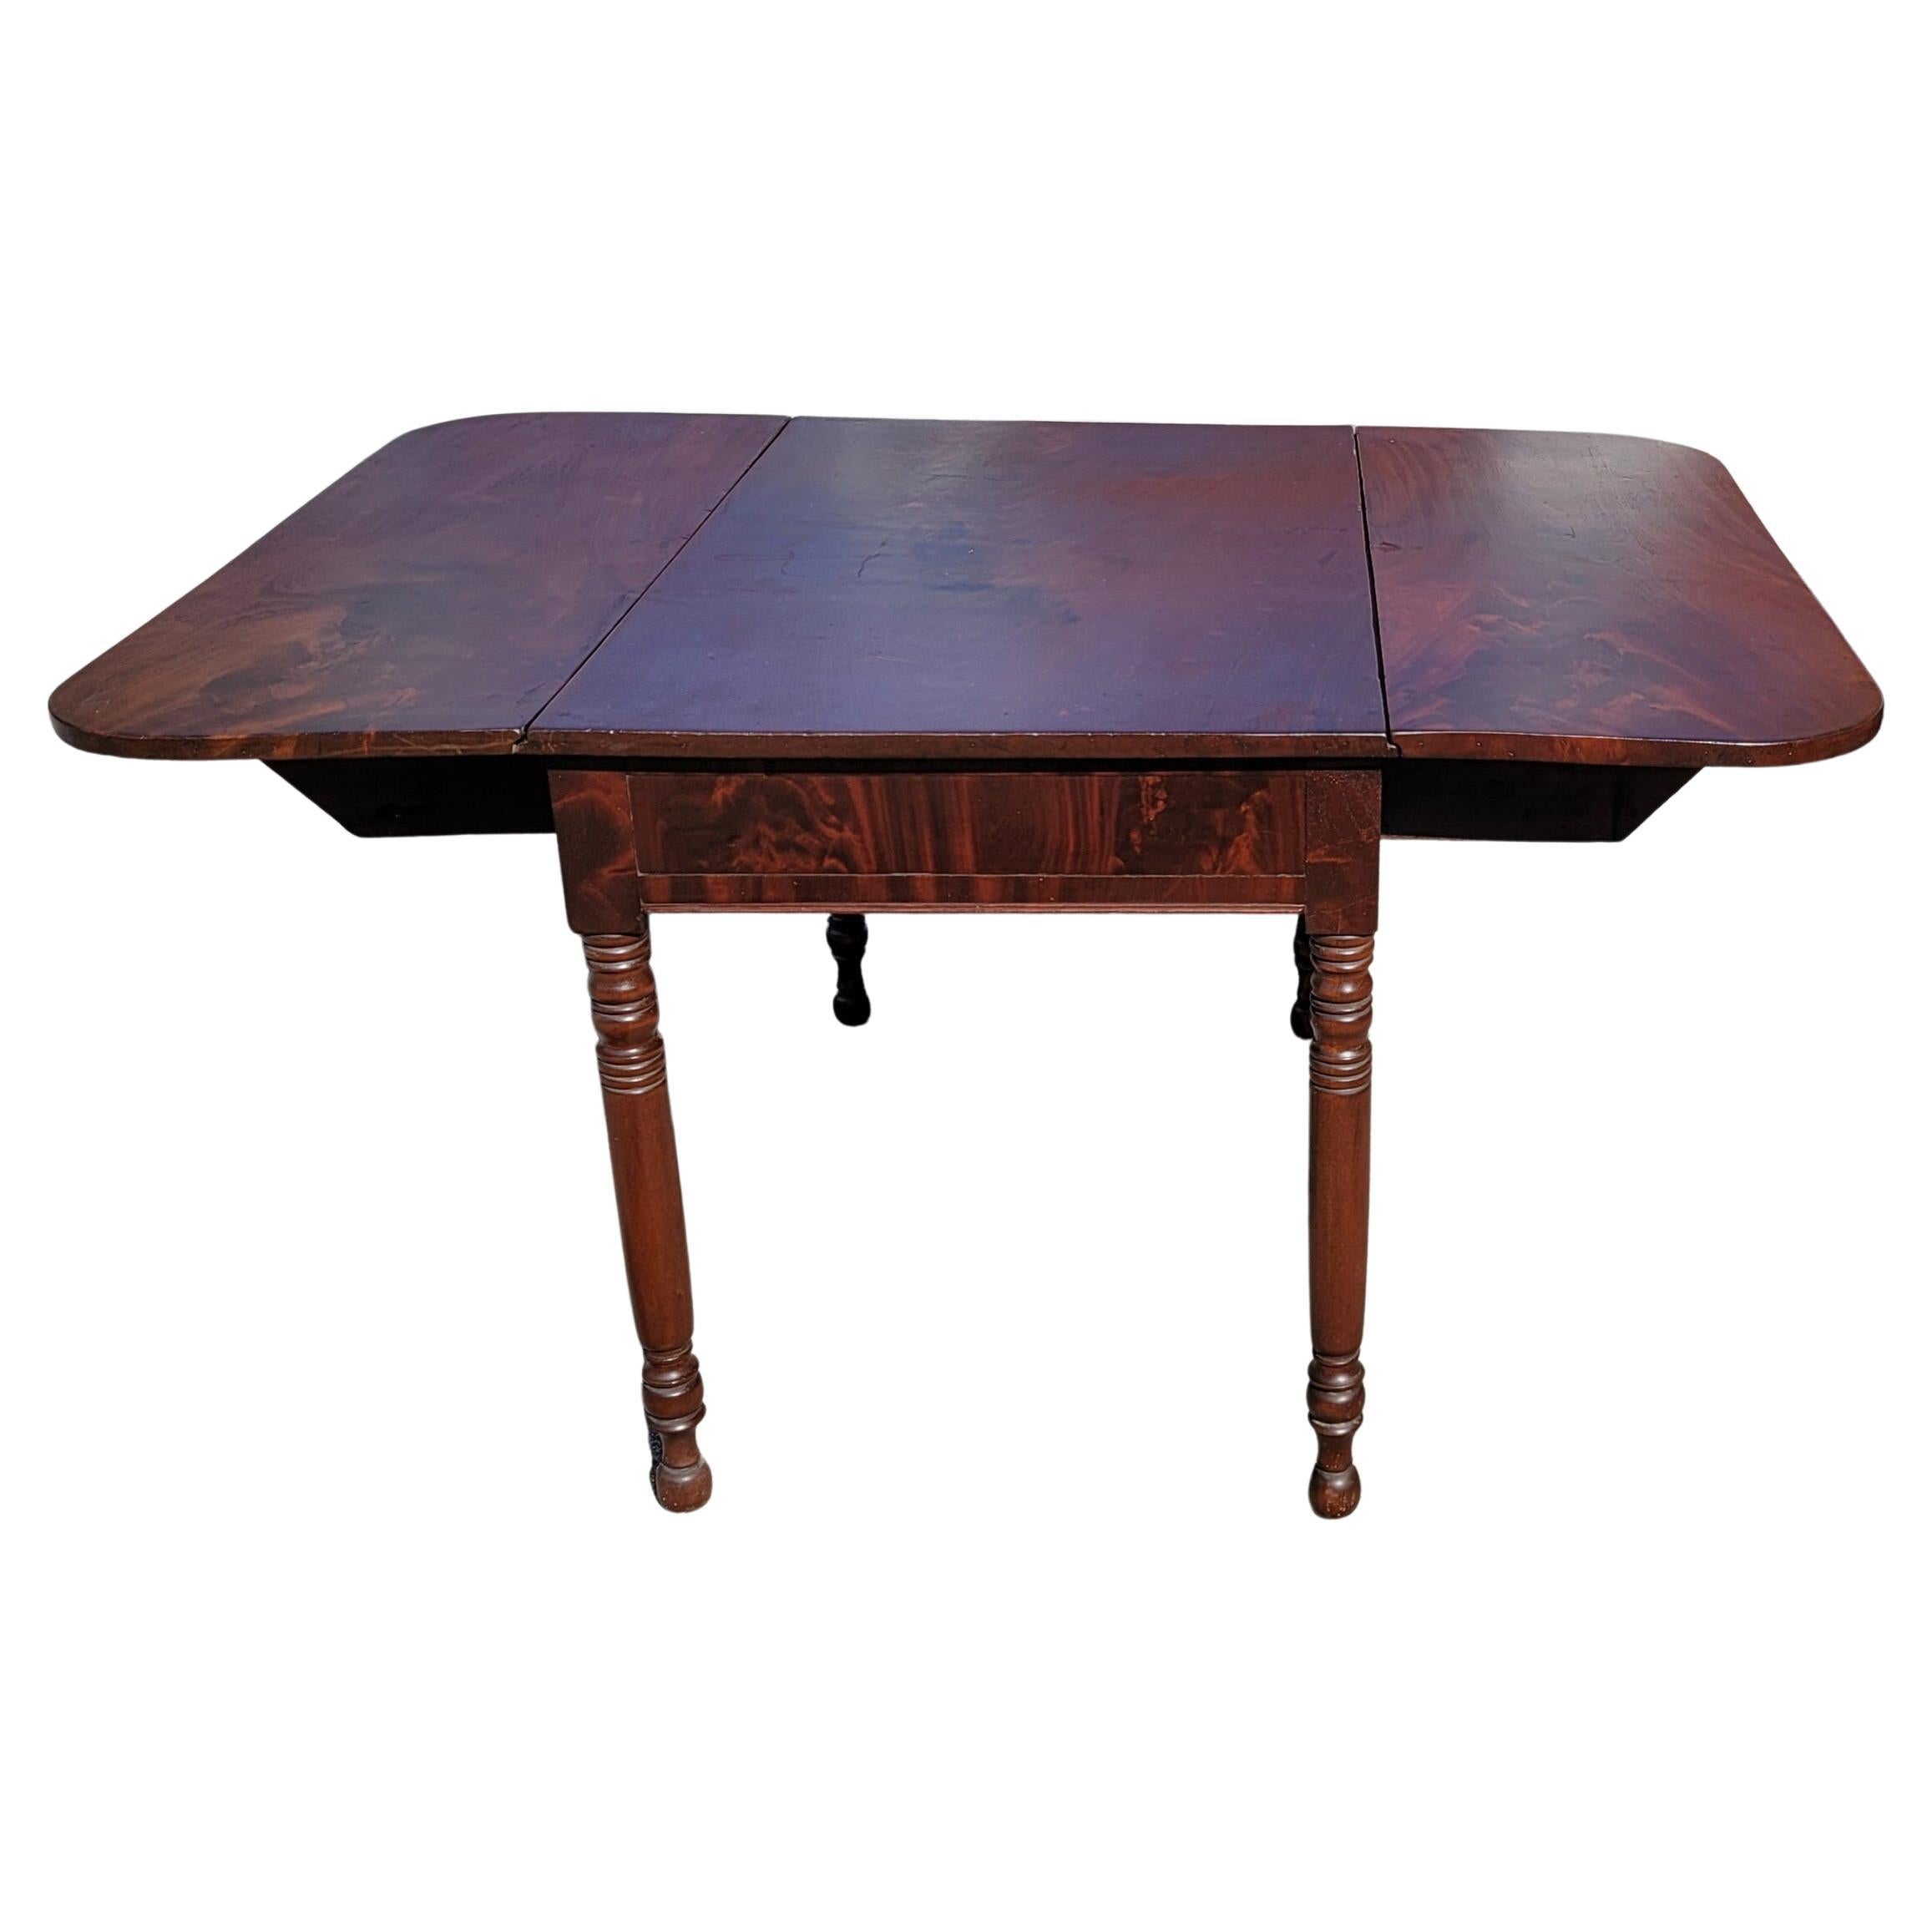 American, mid-19th century, Late Federal, American Empire flame mahogany drop-leaf dining table. Dining table is 40